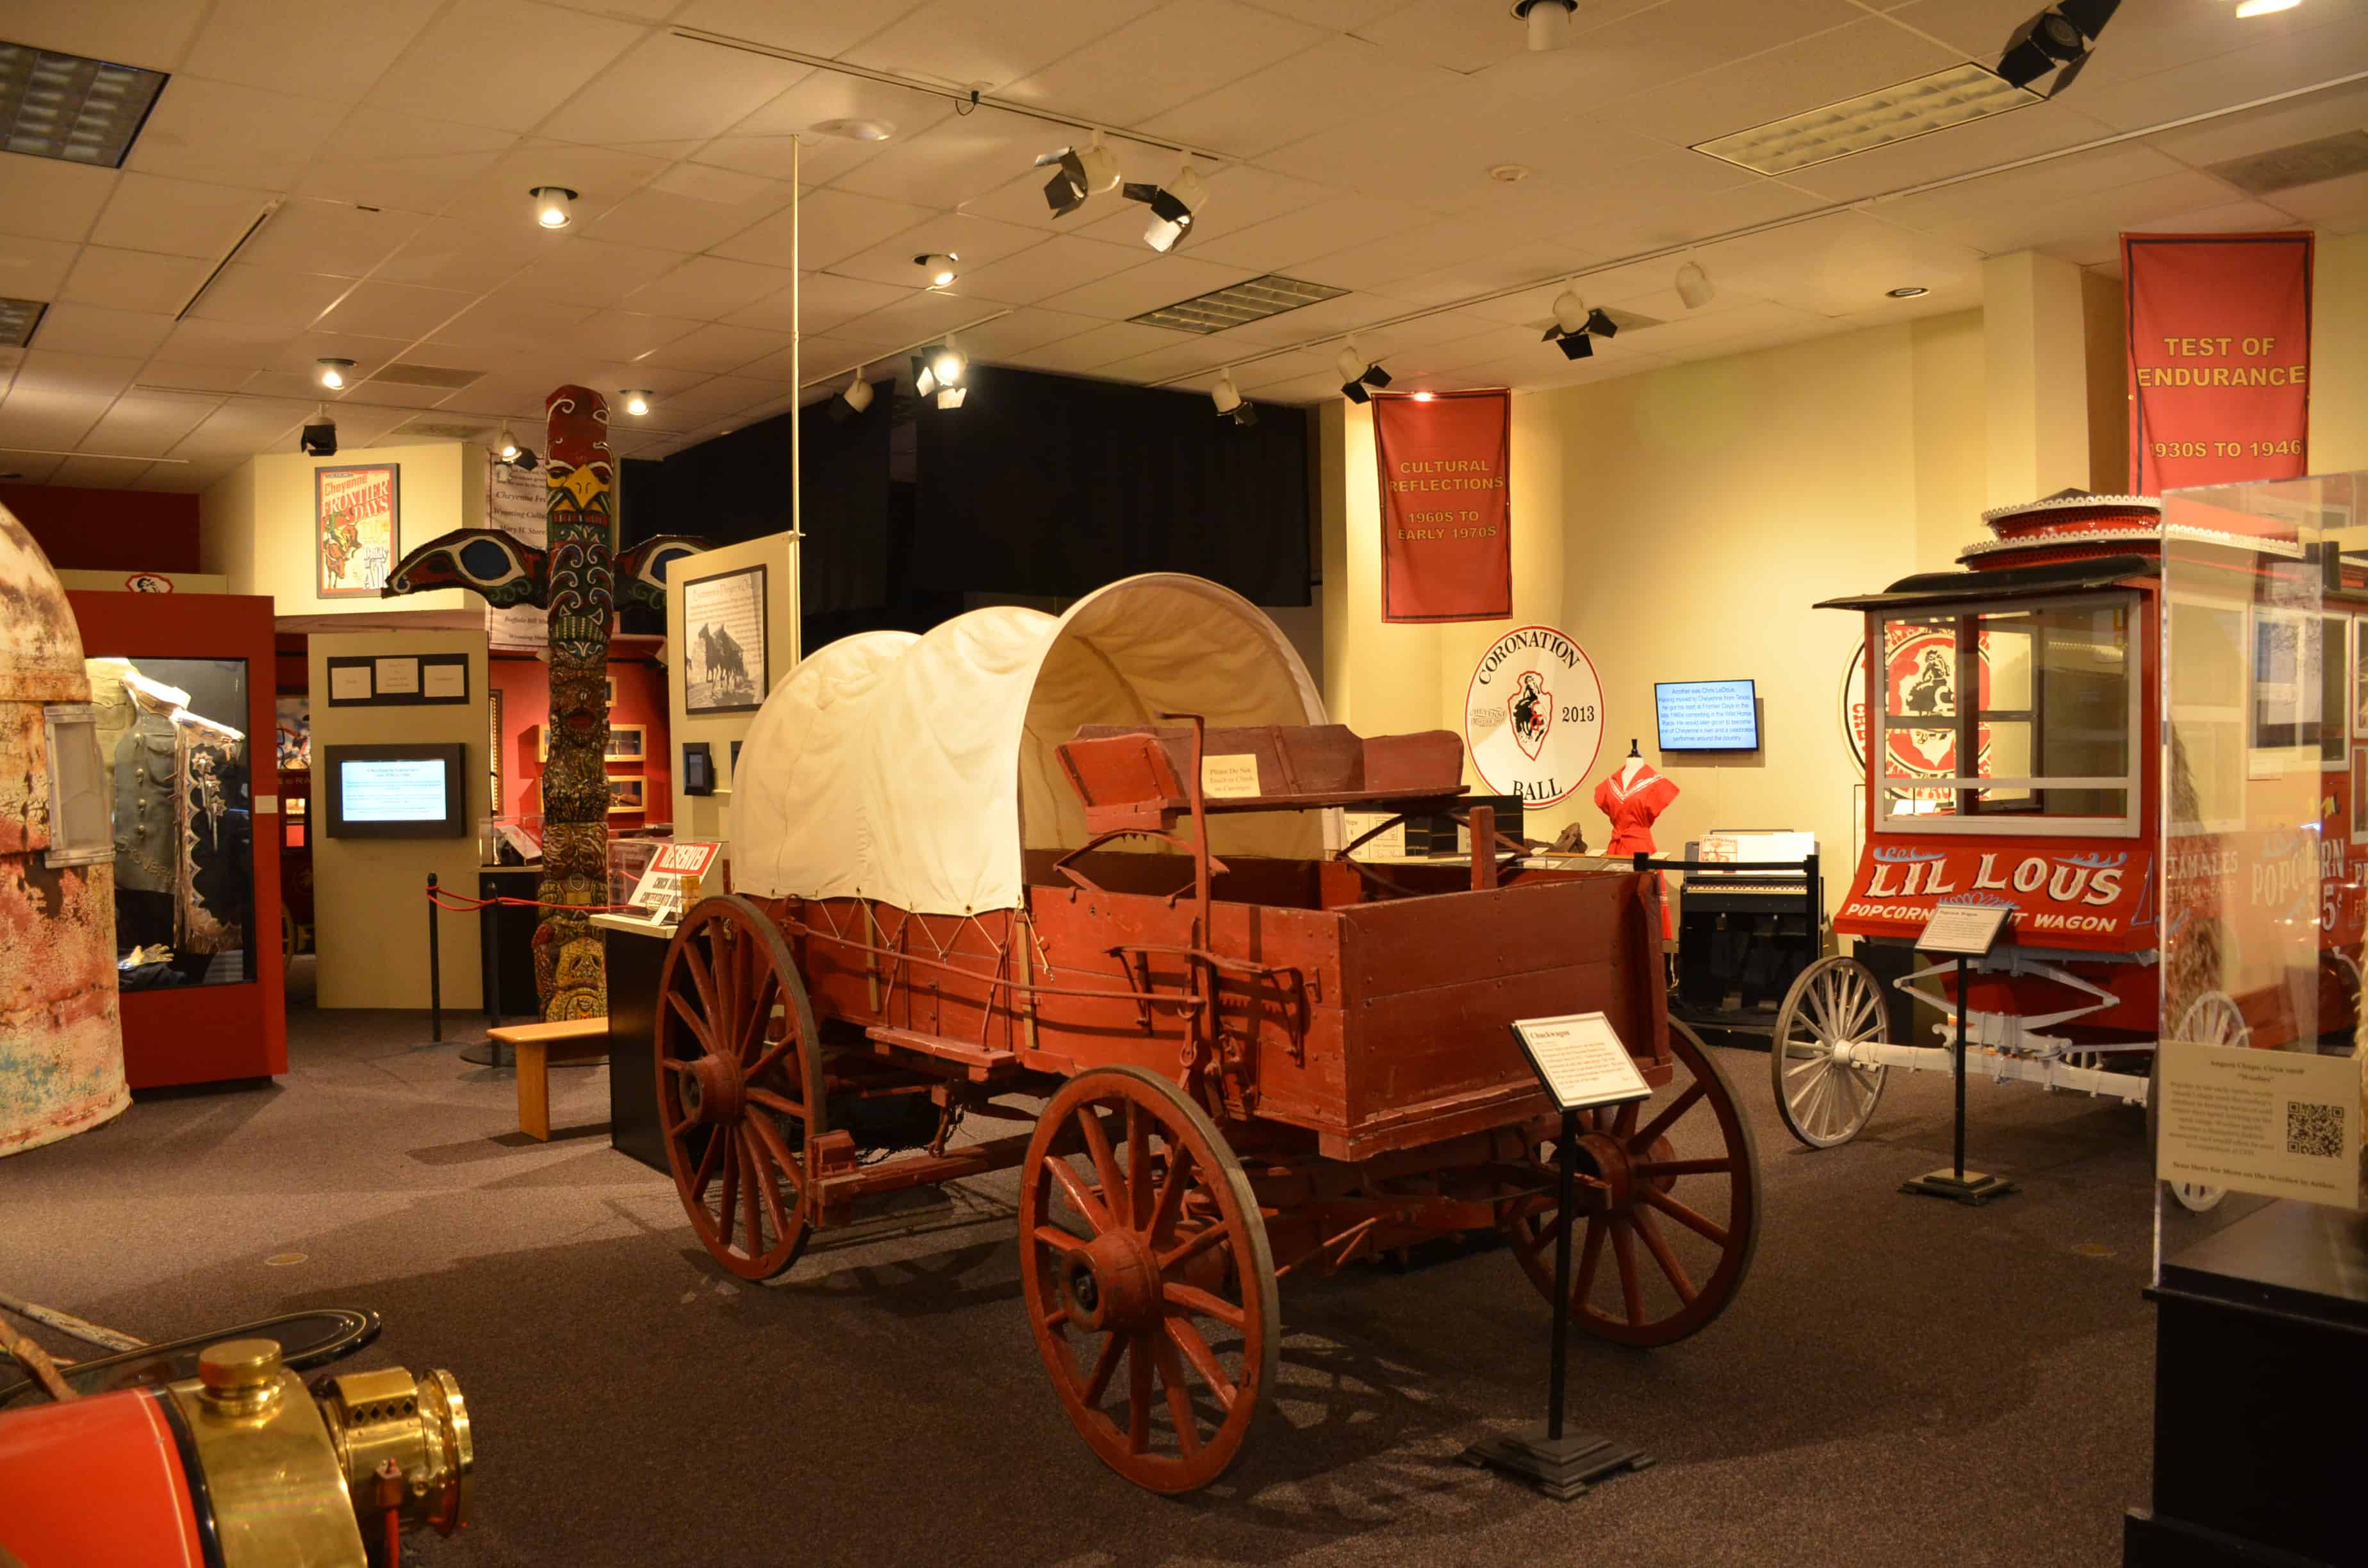 Frontier Days exhibit at the Cheyenne Frontier Days Old West Museum in Wyoming